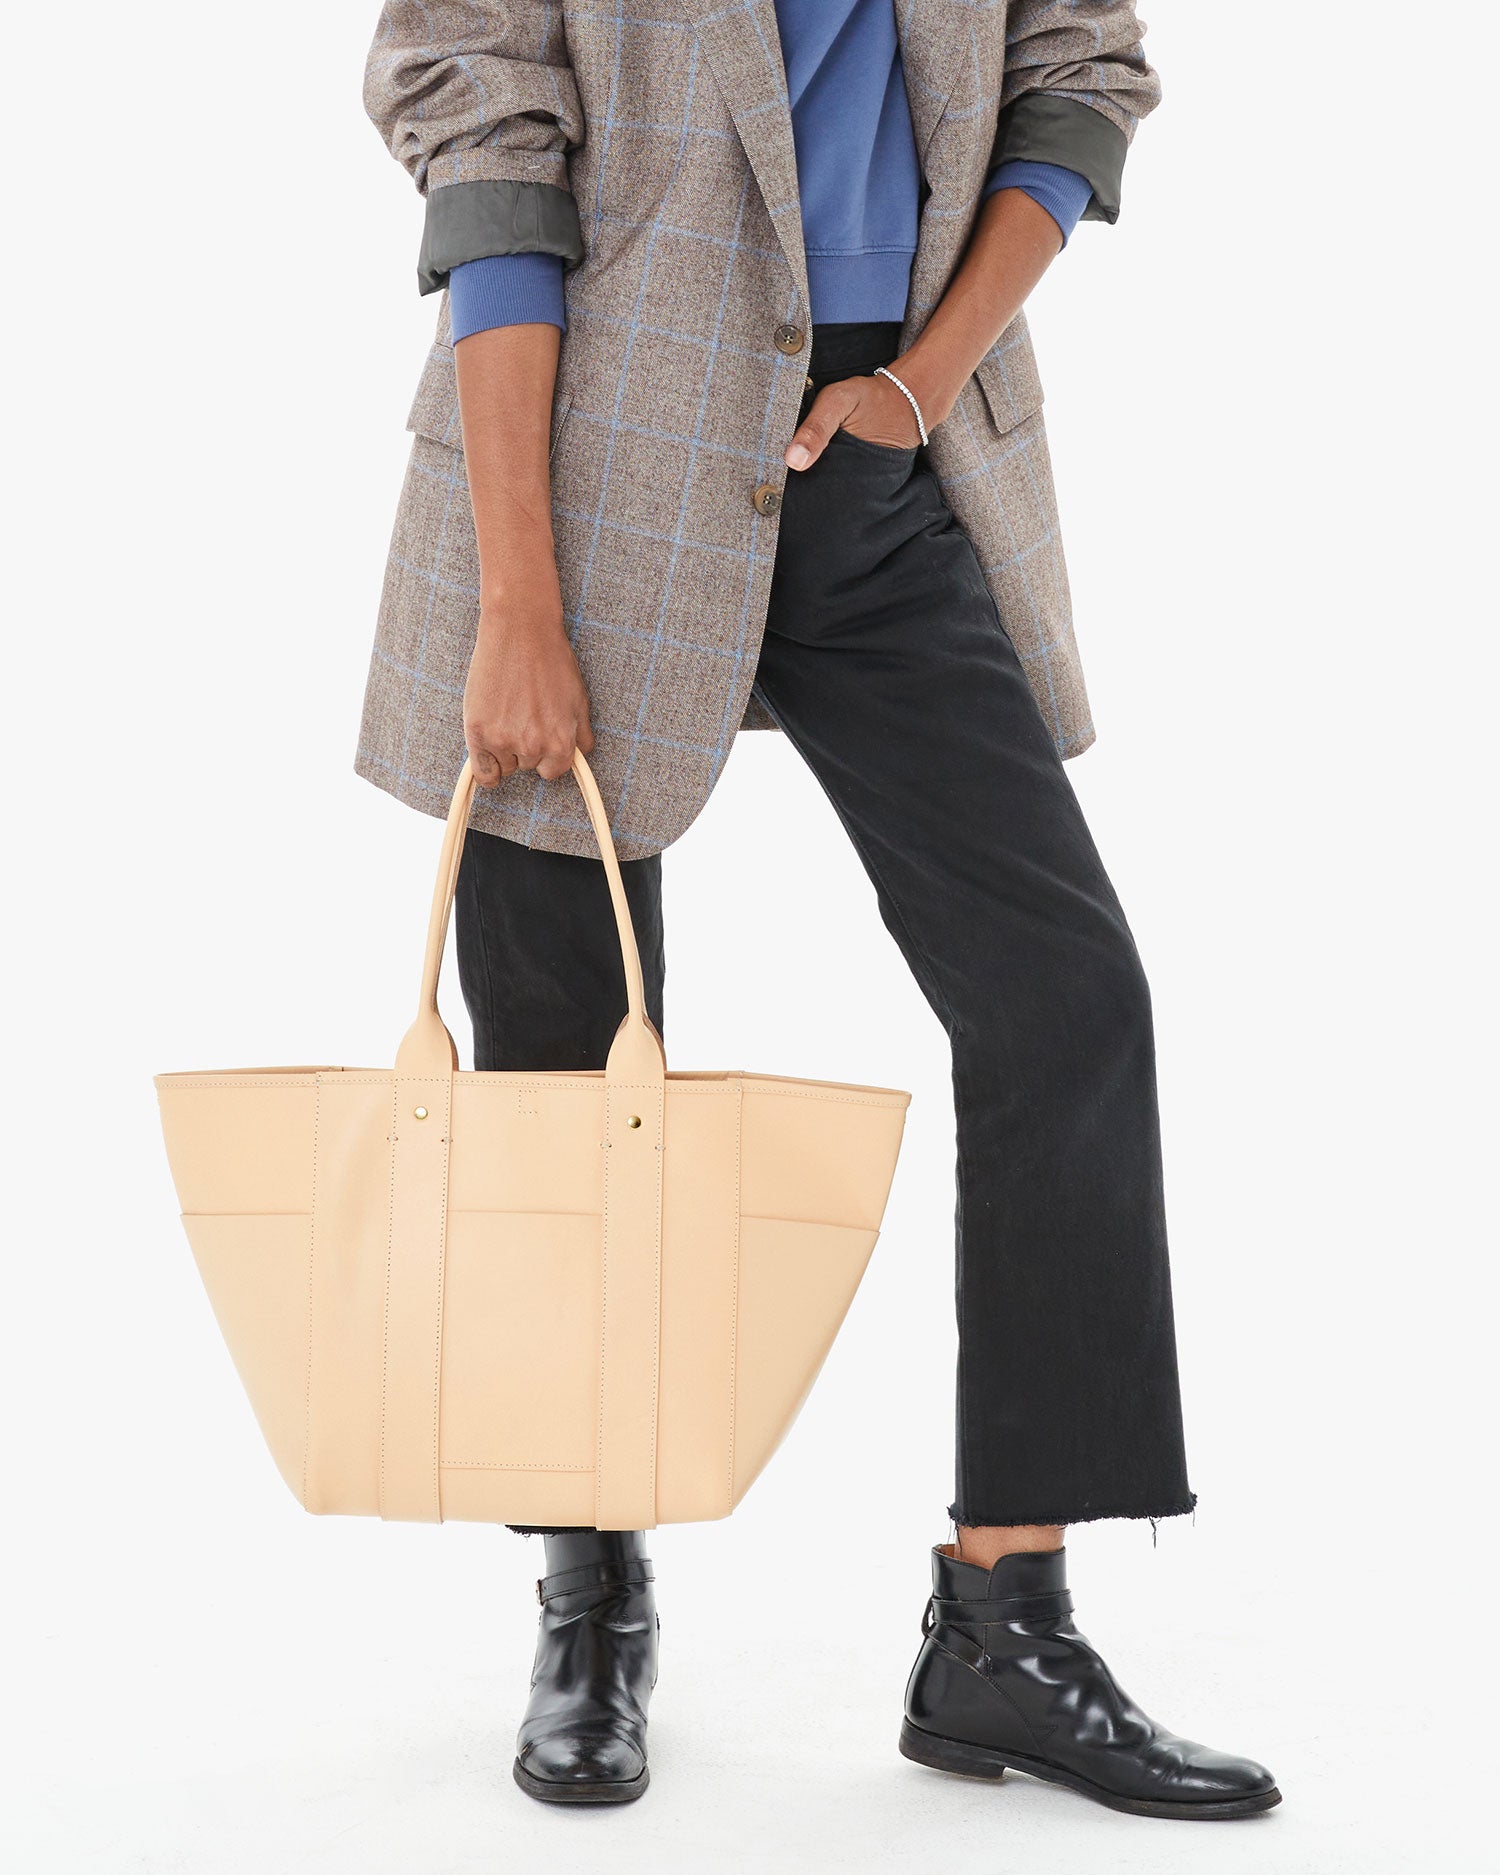 Mecca holding the Undyed Veg Le Slim Box Tote in her right hand